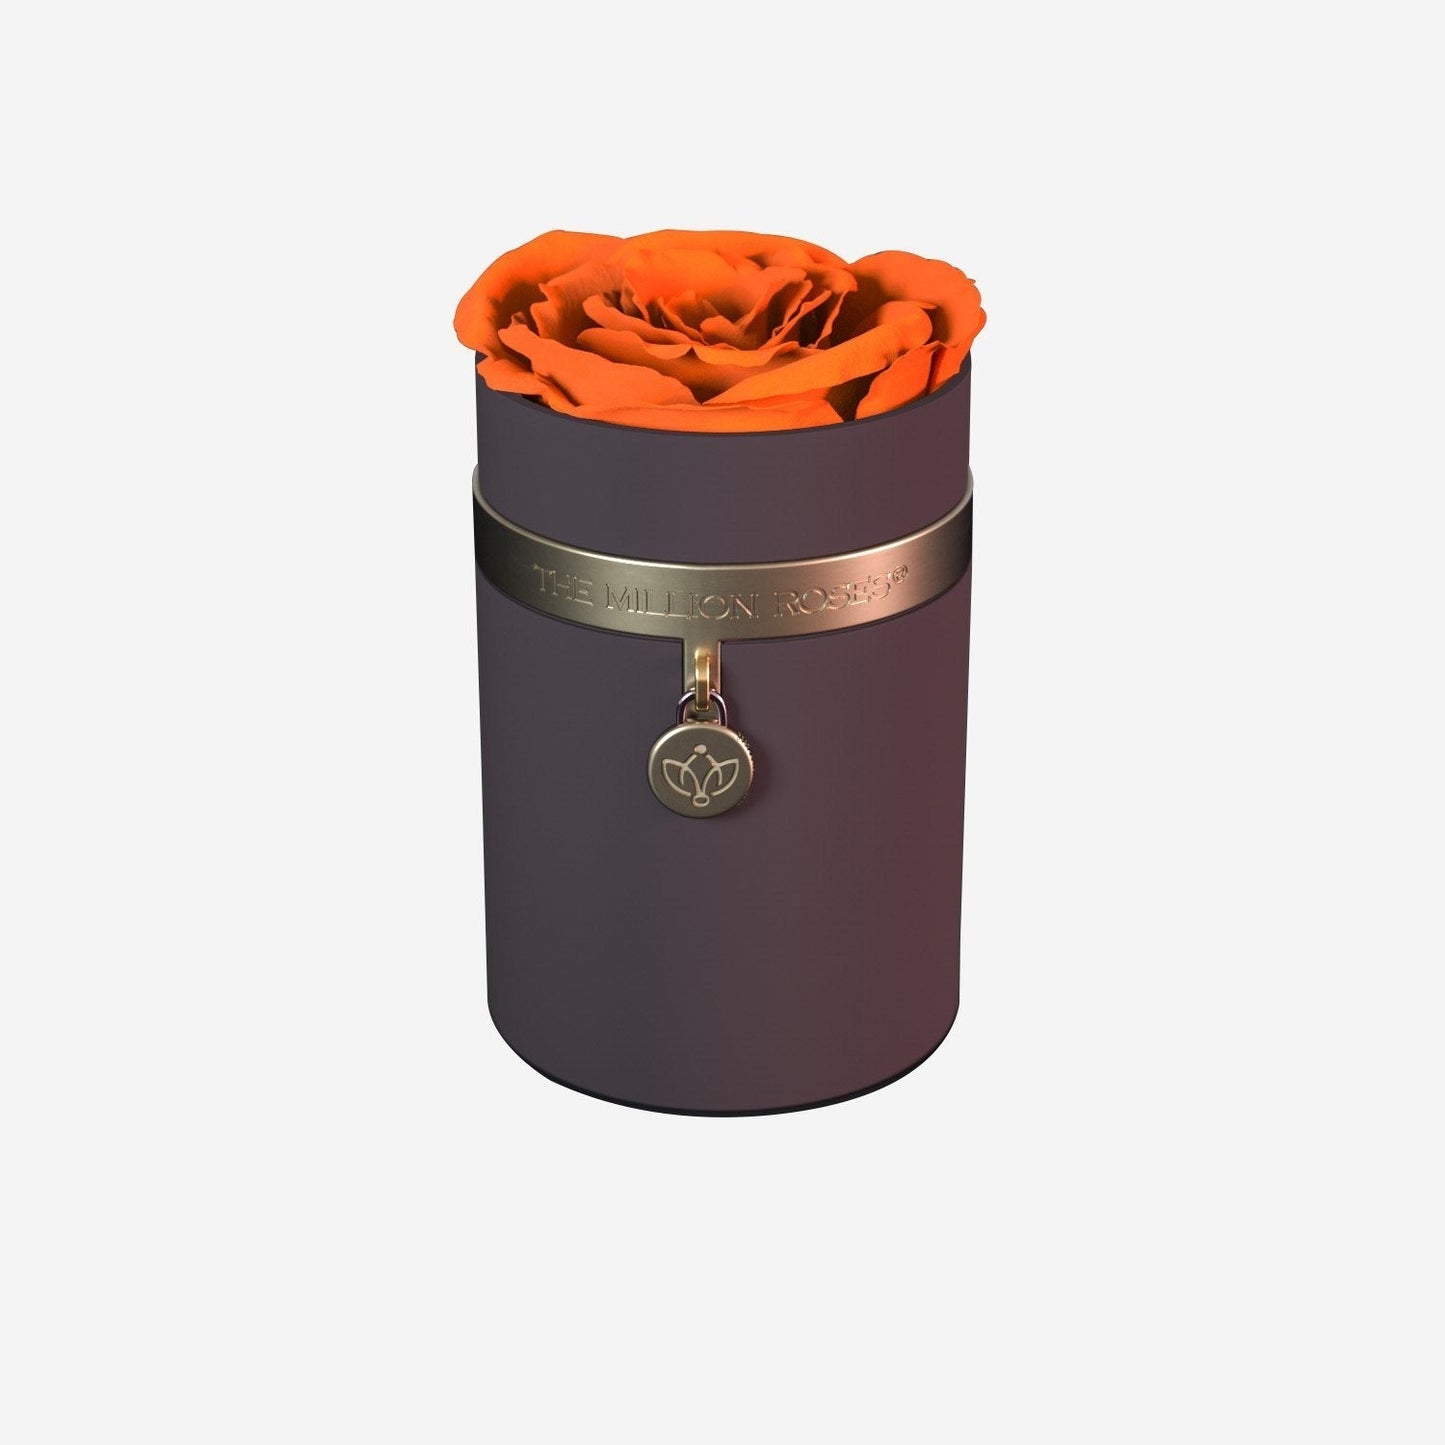 One in a Million™ Round Coffee Box | Charm Edition | Orange Rose - The Million Roses